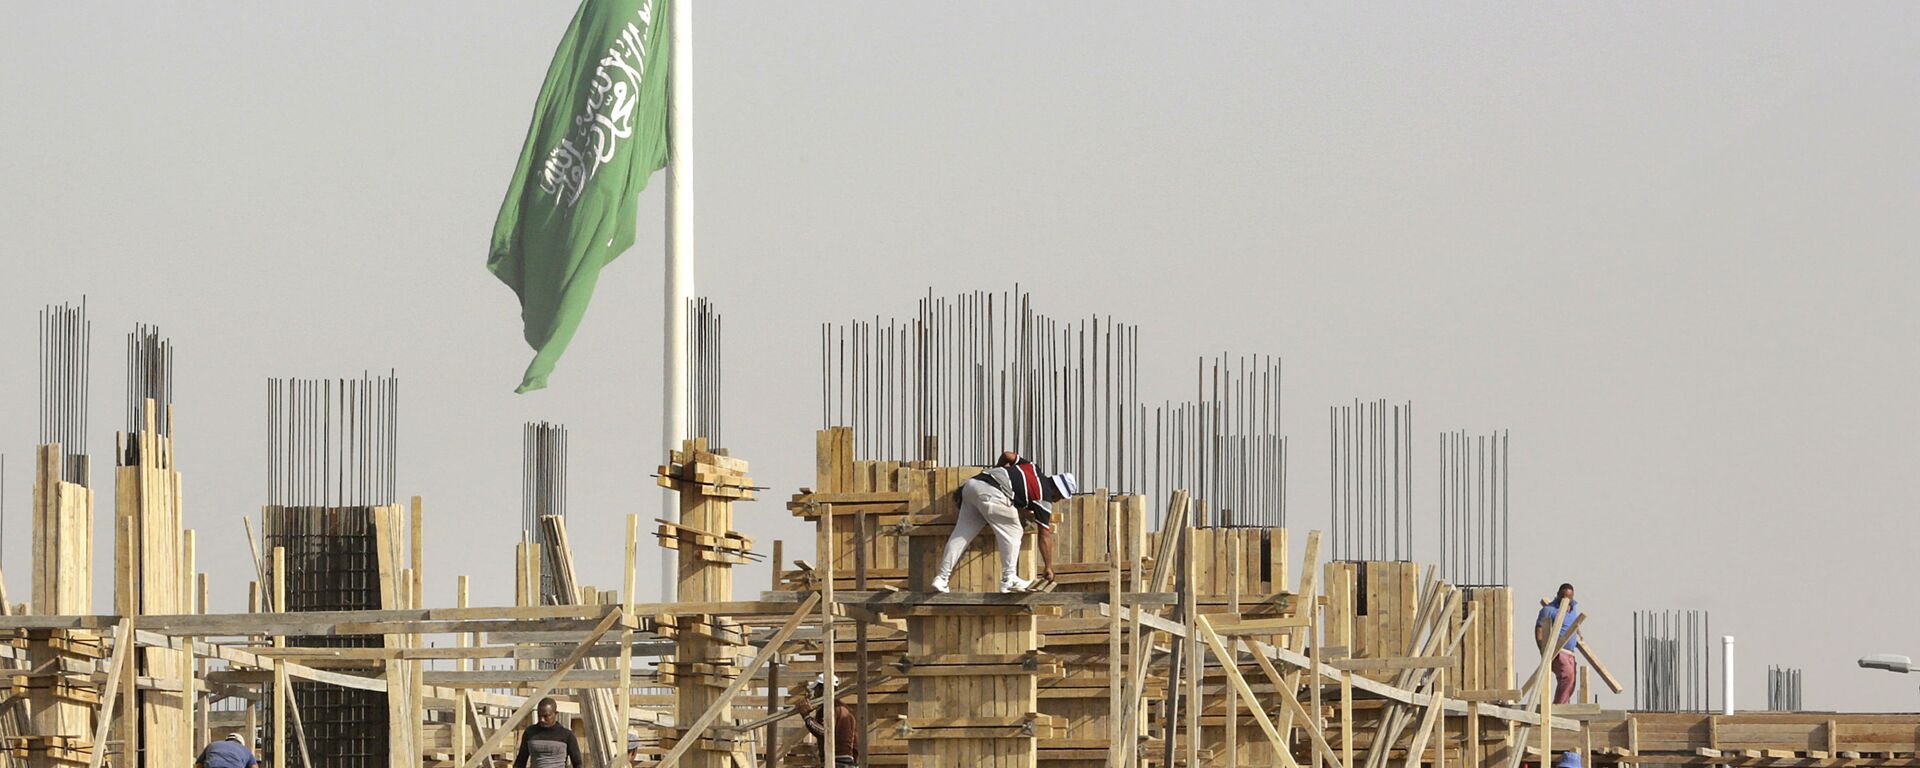 Egyptian workers assemble concrete forms at a building site as a giant Saudi flag hangs in the background at King Abdullah Square in Jiddah, Saudi Arabia, Sunday, March 14, 2021 - Sputnik International, 1920, 12.03.2022